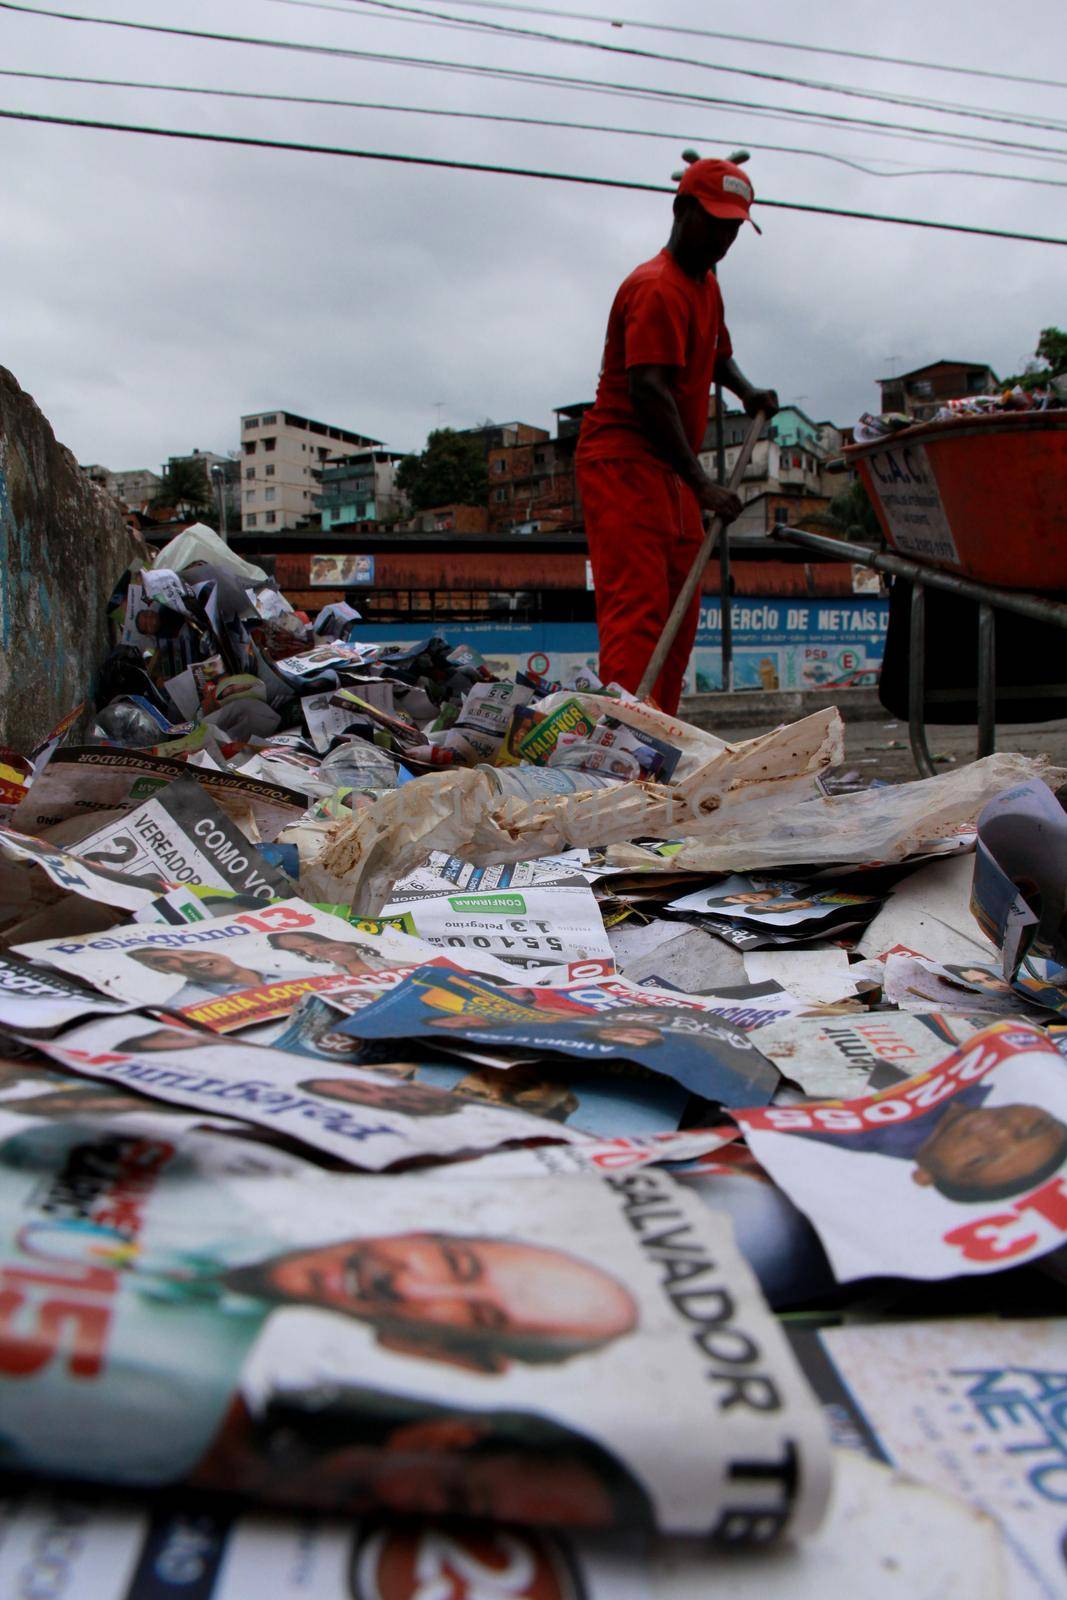 salvador, bahia / brazil - october 8, 2012: Gari is seen collecting electoral propaganda pamphlet paper during elections in the city of Salvador.
